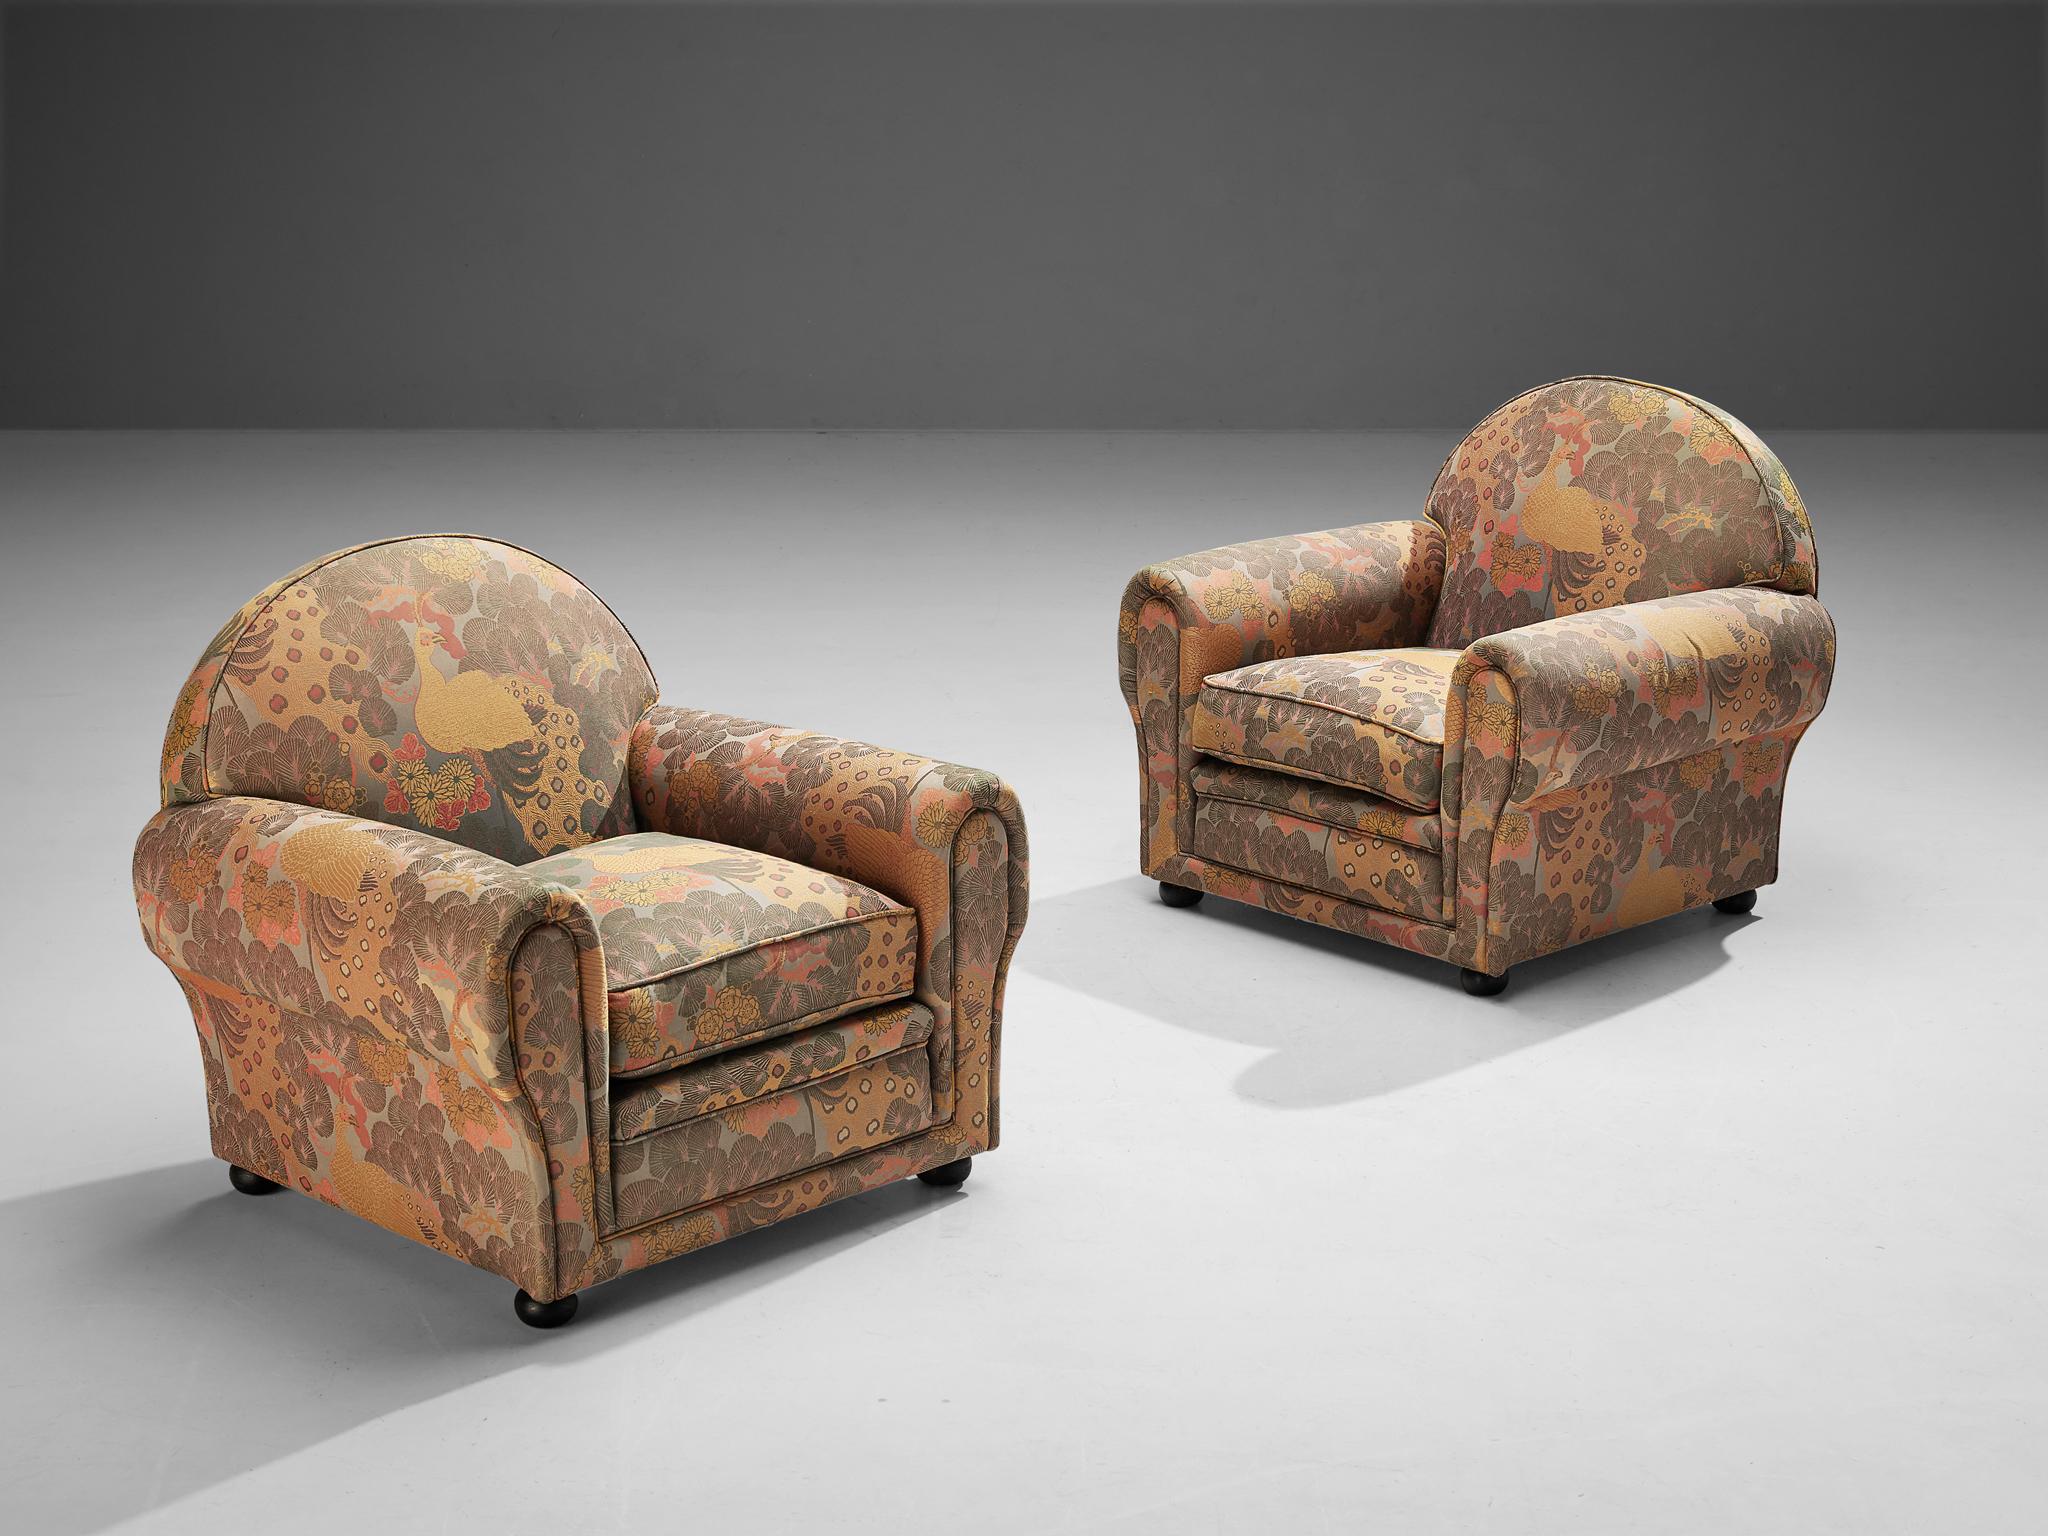 Armchairs, fabric, dark stained wood, Italy, 1930s

Not often one will come across such a delightful pair of Art Deco armchairs in original upholstery which is in overall good condition. Its botanical print will definitly swipe you off your feet. Or